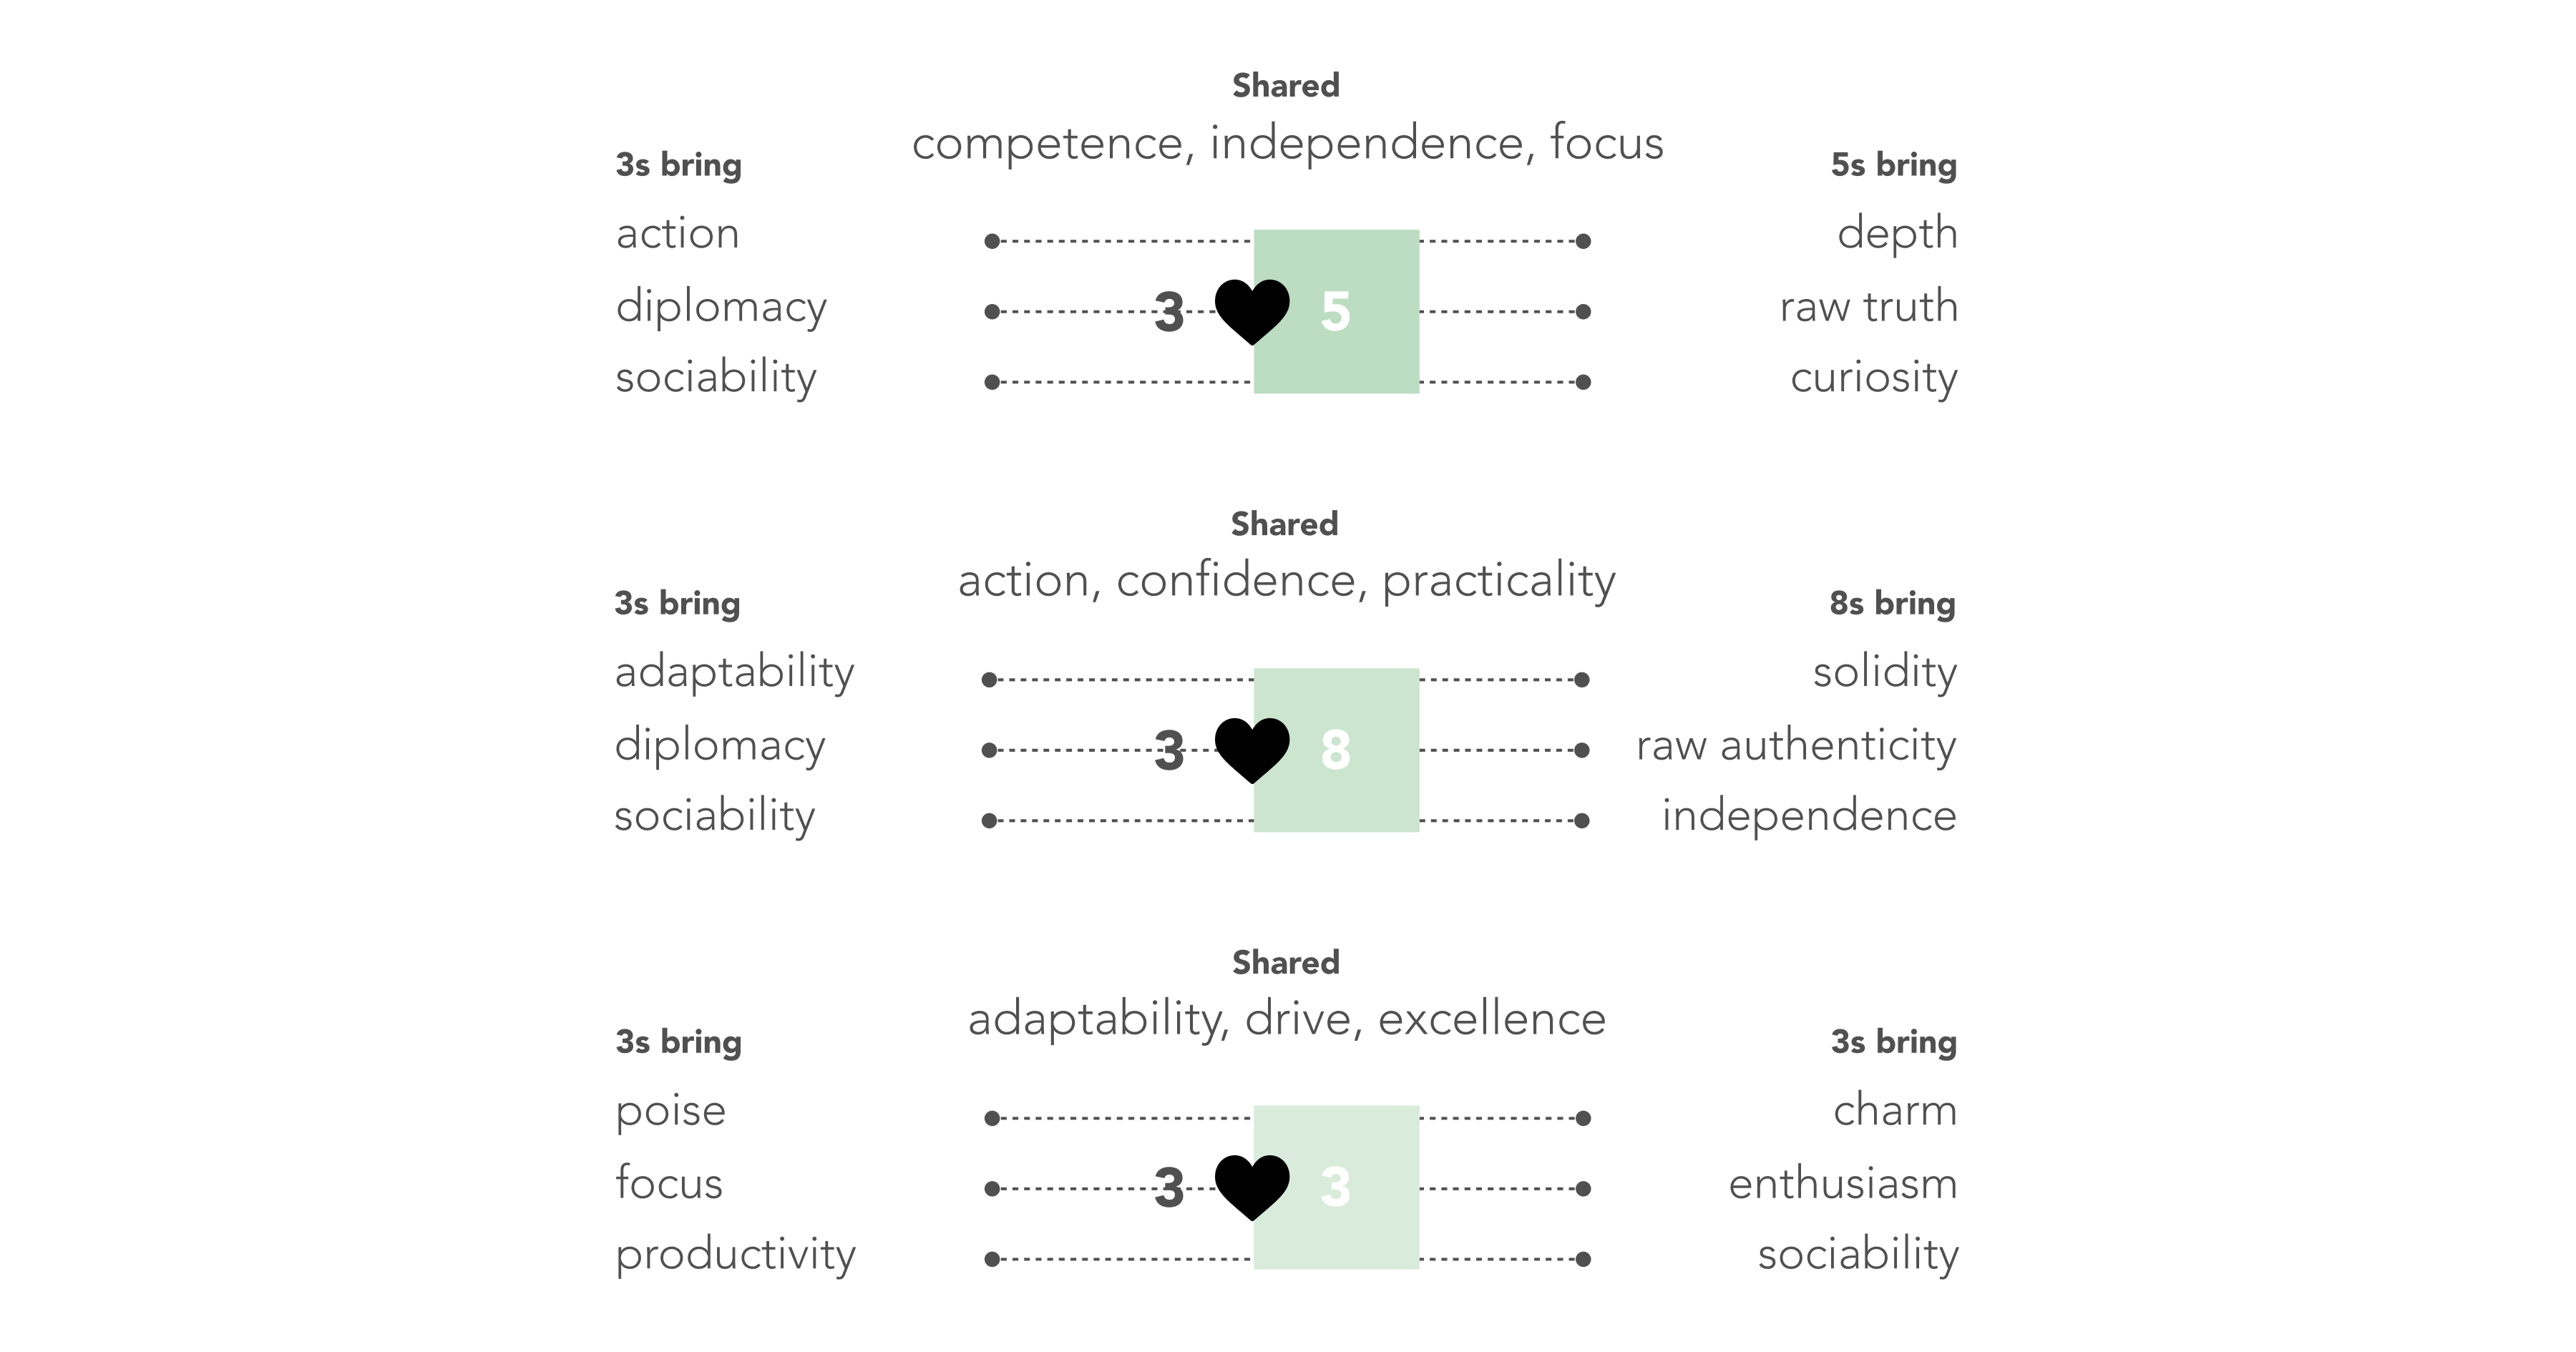 3s and 5s share competence, independence, focus. 3s bring action, diplomacy, sociability, while 5s bring depth, raw truth, curiosity. 3s and 8s share action, confidence, practicality. 3s bring adaptability, diplomacy, sociability, while 8s bring solidity, raw authenticity, independence. 3s share adaptability, drive, excellence. 3s bring poise, focus, productivity, while 3s being charm, enthusiasm, sociability.